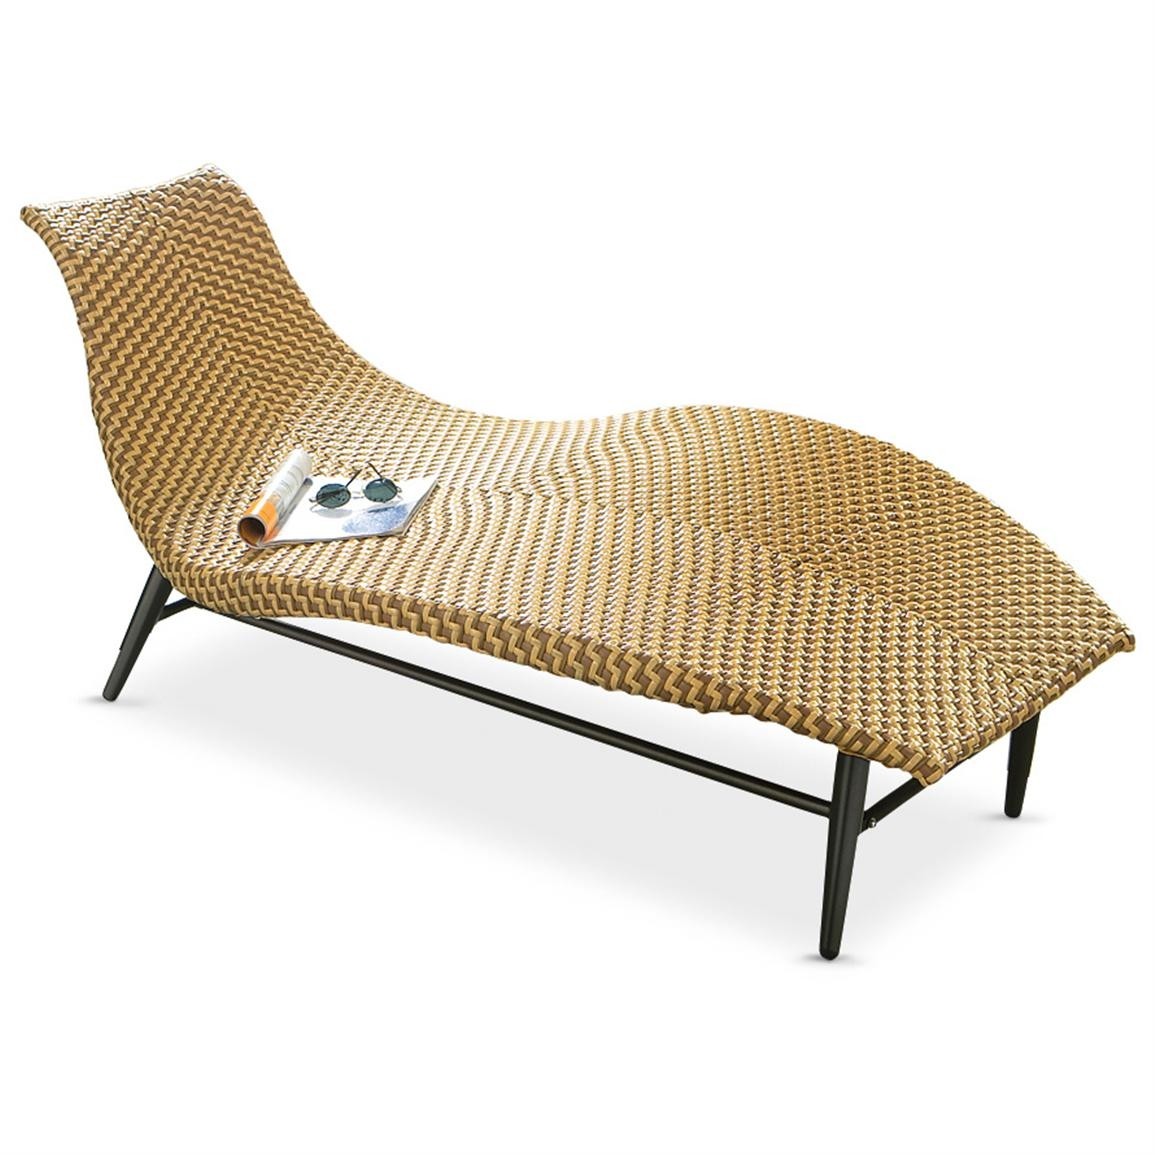 Banana leaf chaise lounge 138456 patio furniture at